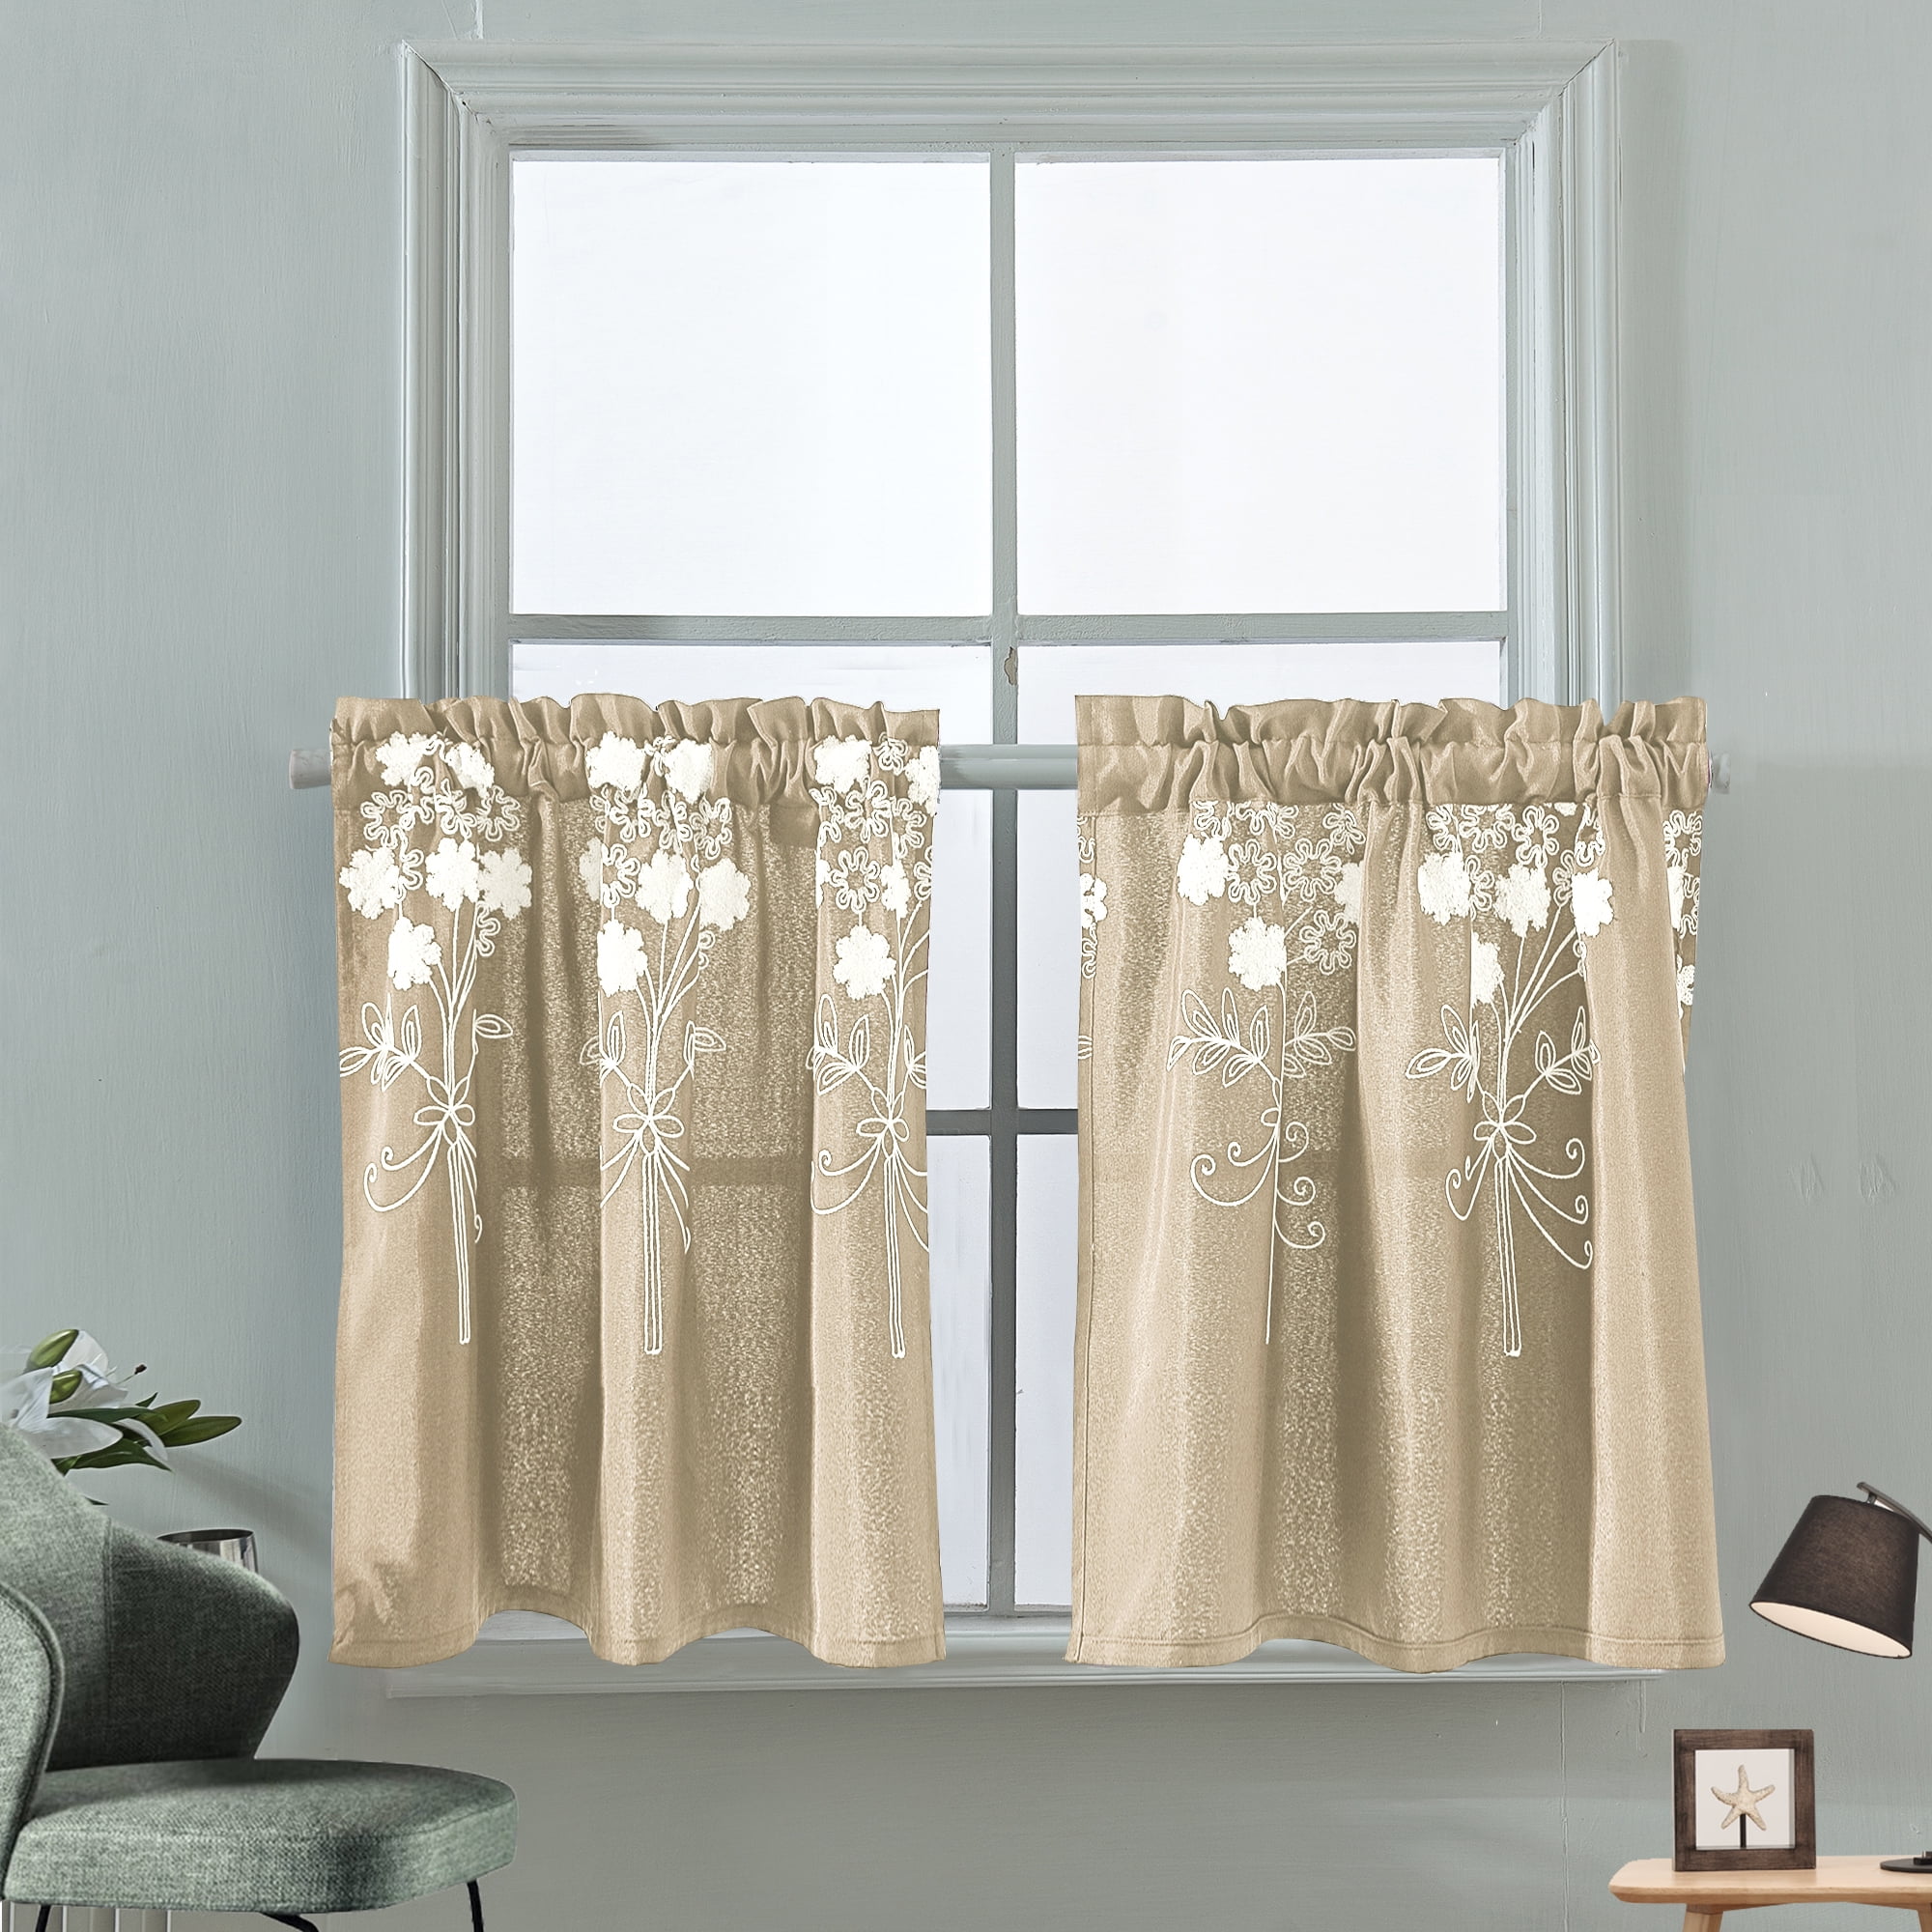 WINYY Romantic Floral Curtain Kitchen Short Sheer Curtain for Bathroom Window Dining Room Cafe Balcony Home Decor Rod Pocket Voile Tulle 1 Piece 39 Inch Wide, 42 Inch Long